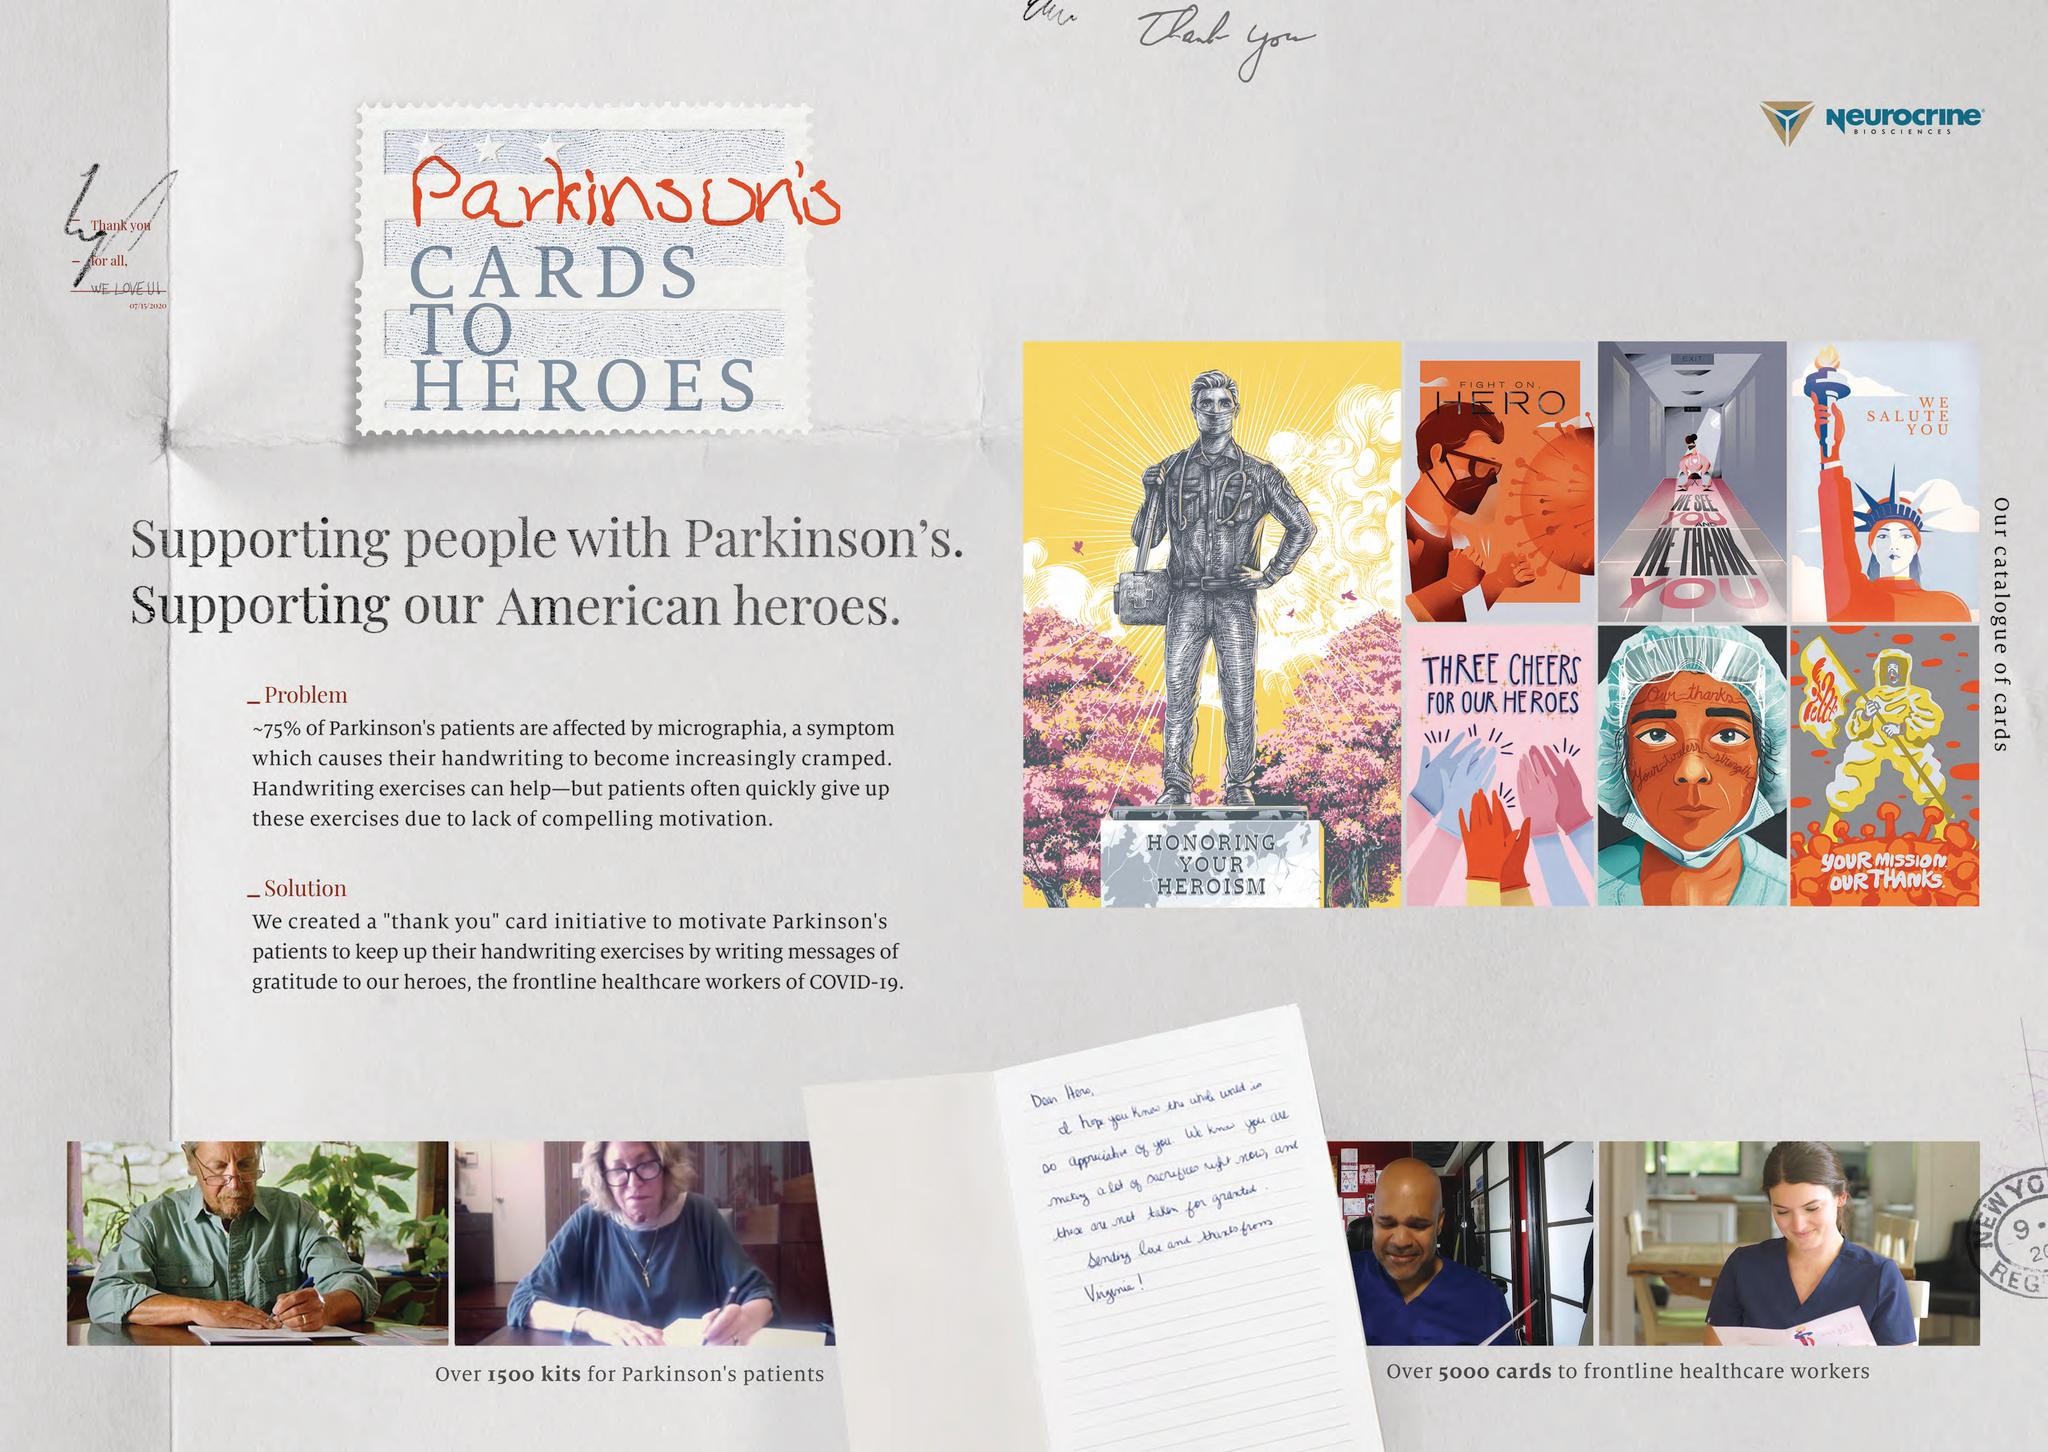 PARKINSON’S CARDS TO HEROES